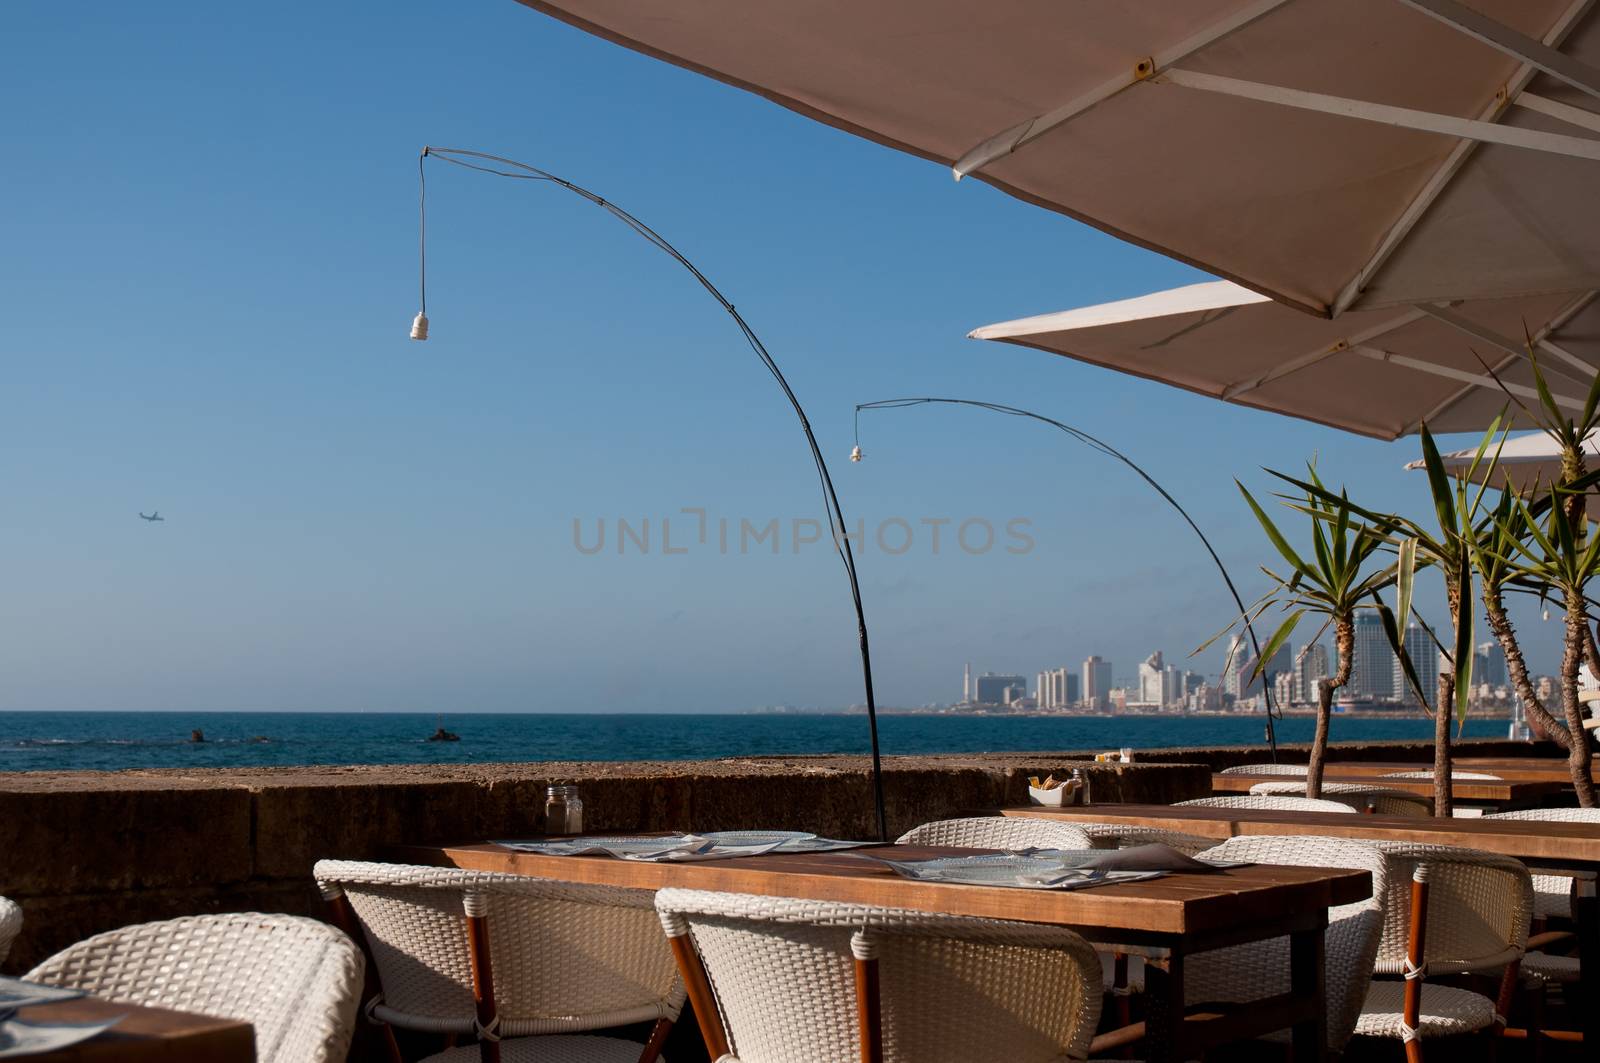 The restaurant on the port Jaffa . by LarisaP